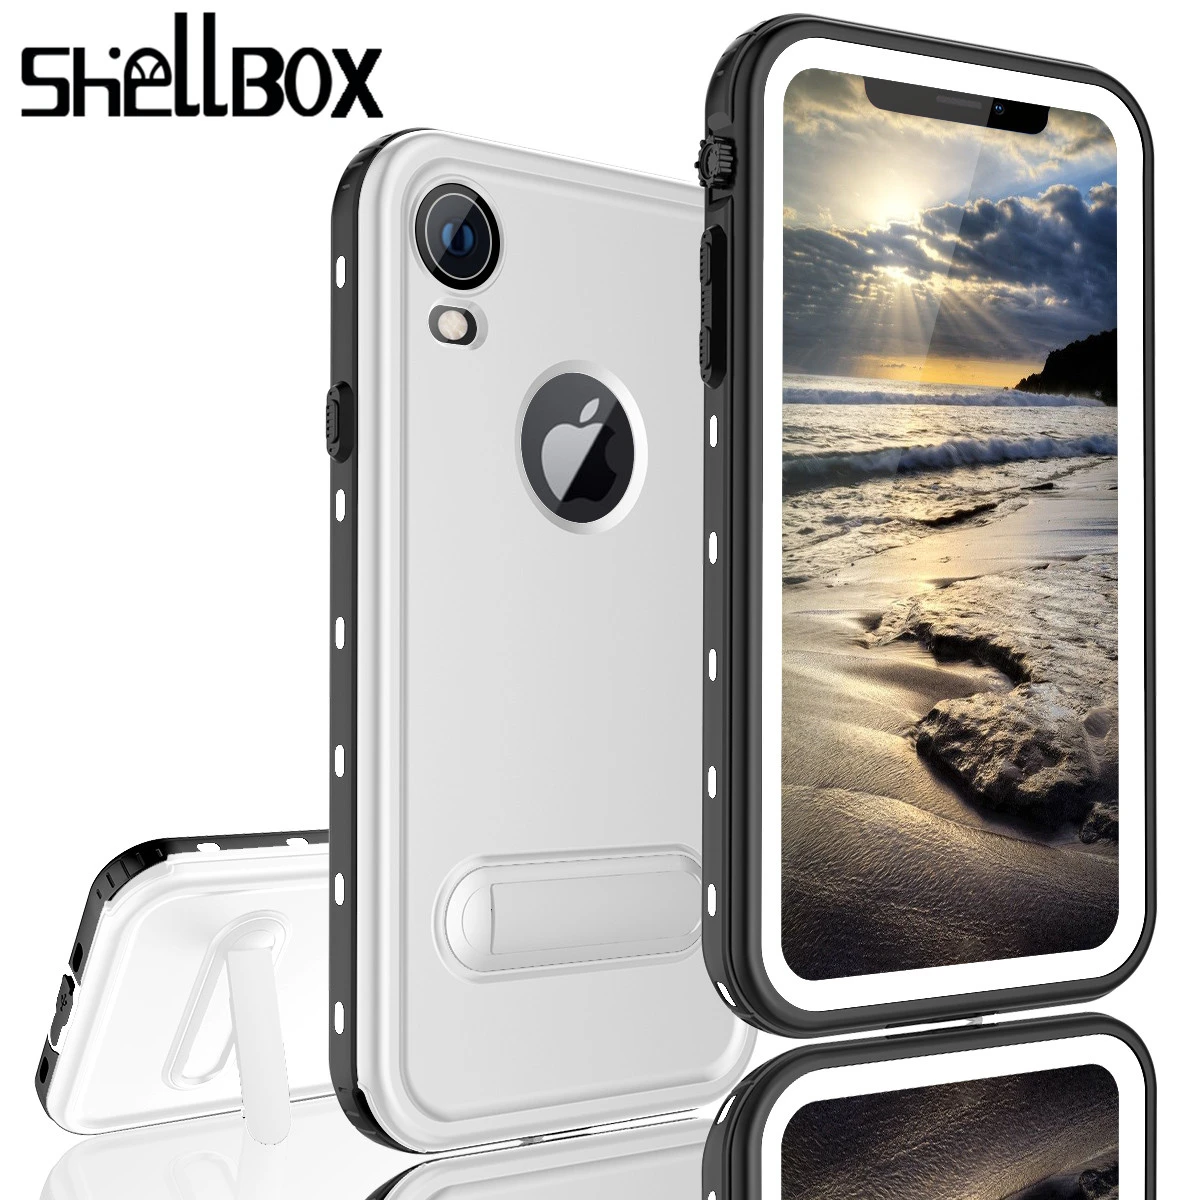 Shellbox Ip68 Waterproof Case For Iphone Xr X Xs Max Water Proof Cover Diving Out Sports 360 Protect Case For Iphone Xs - Mobile Phone Cases & Covers - AliExpress